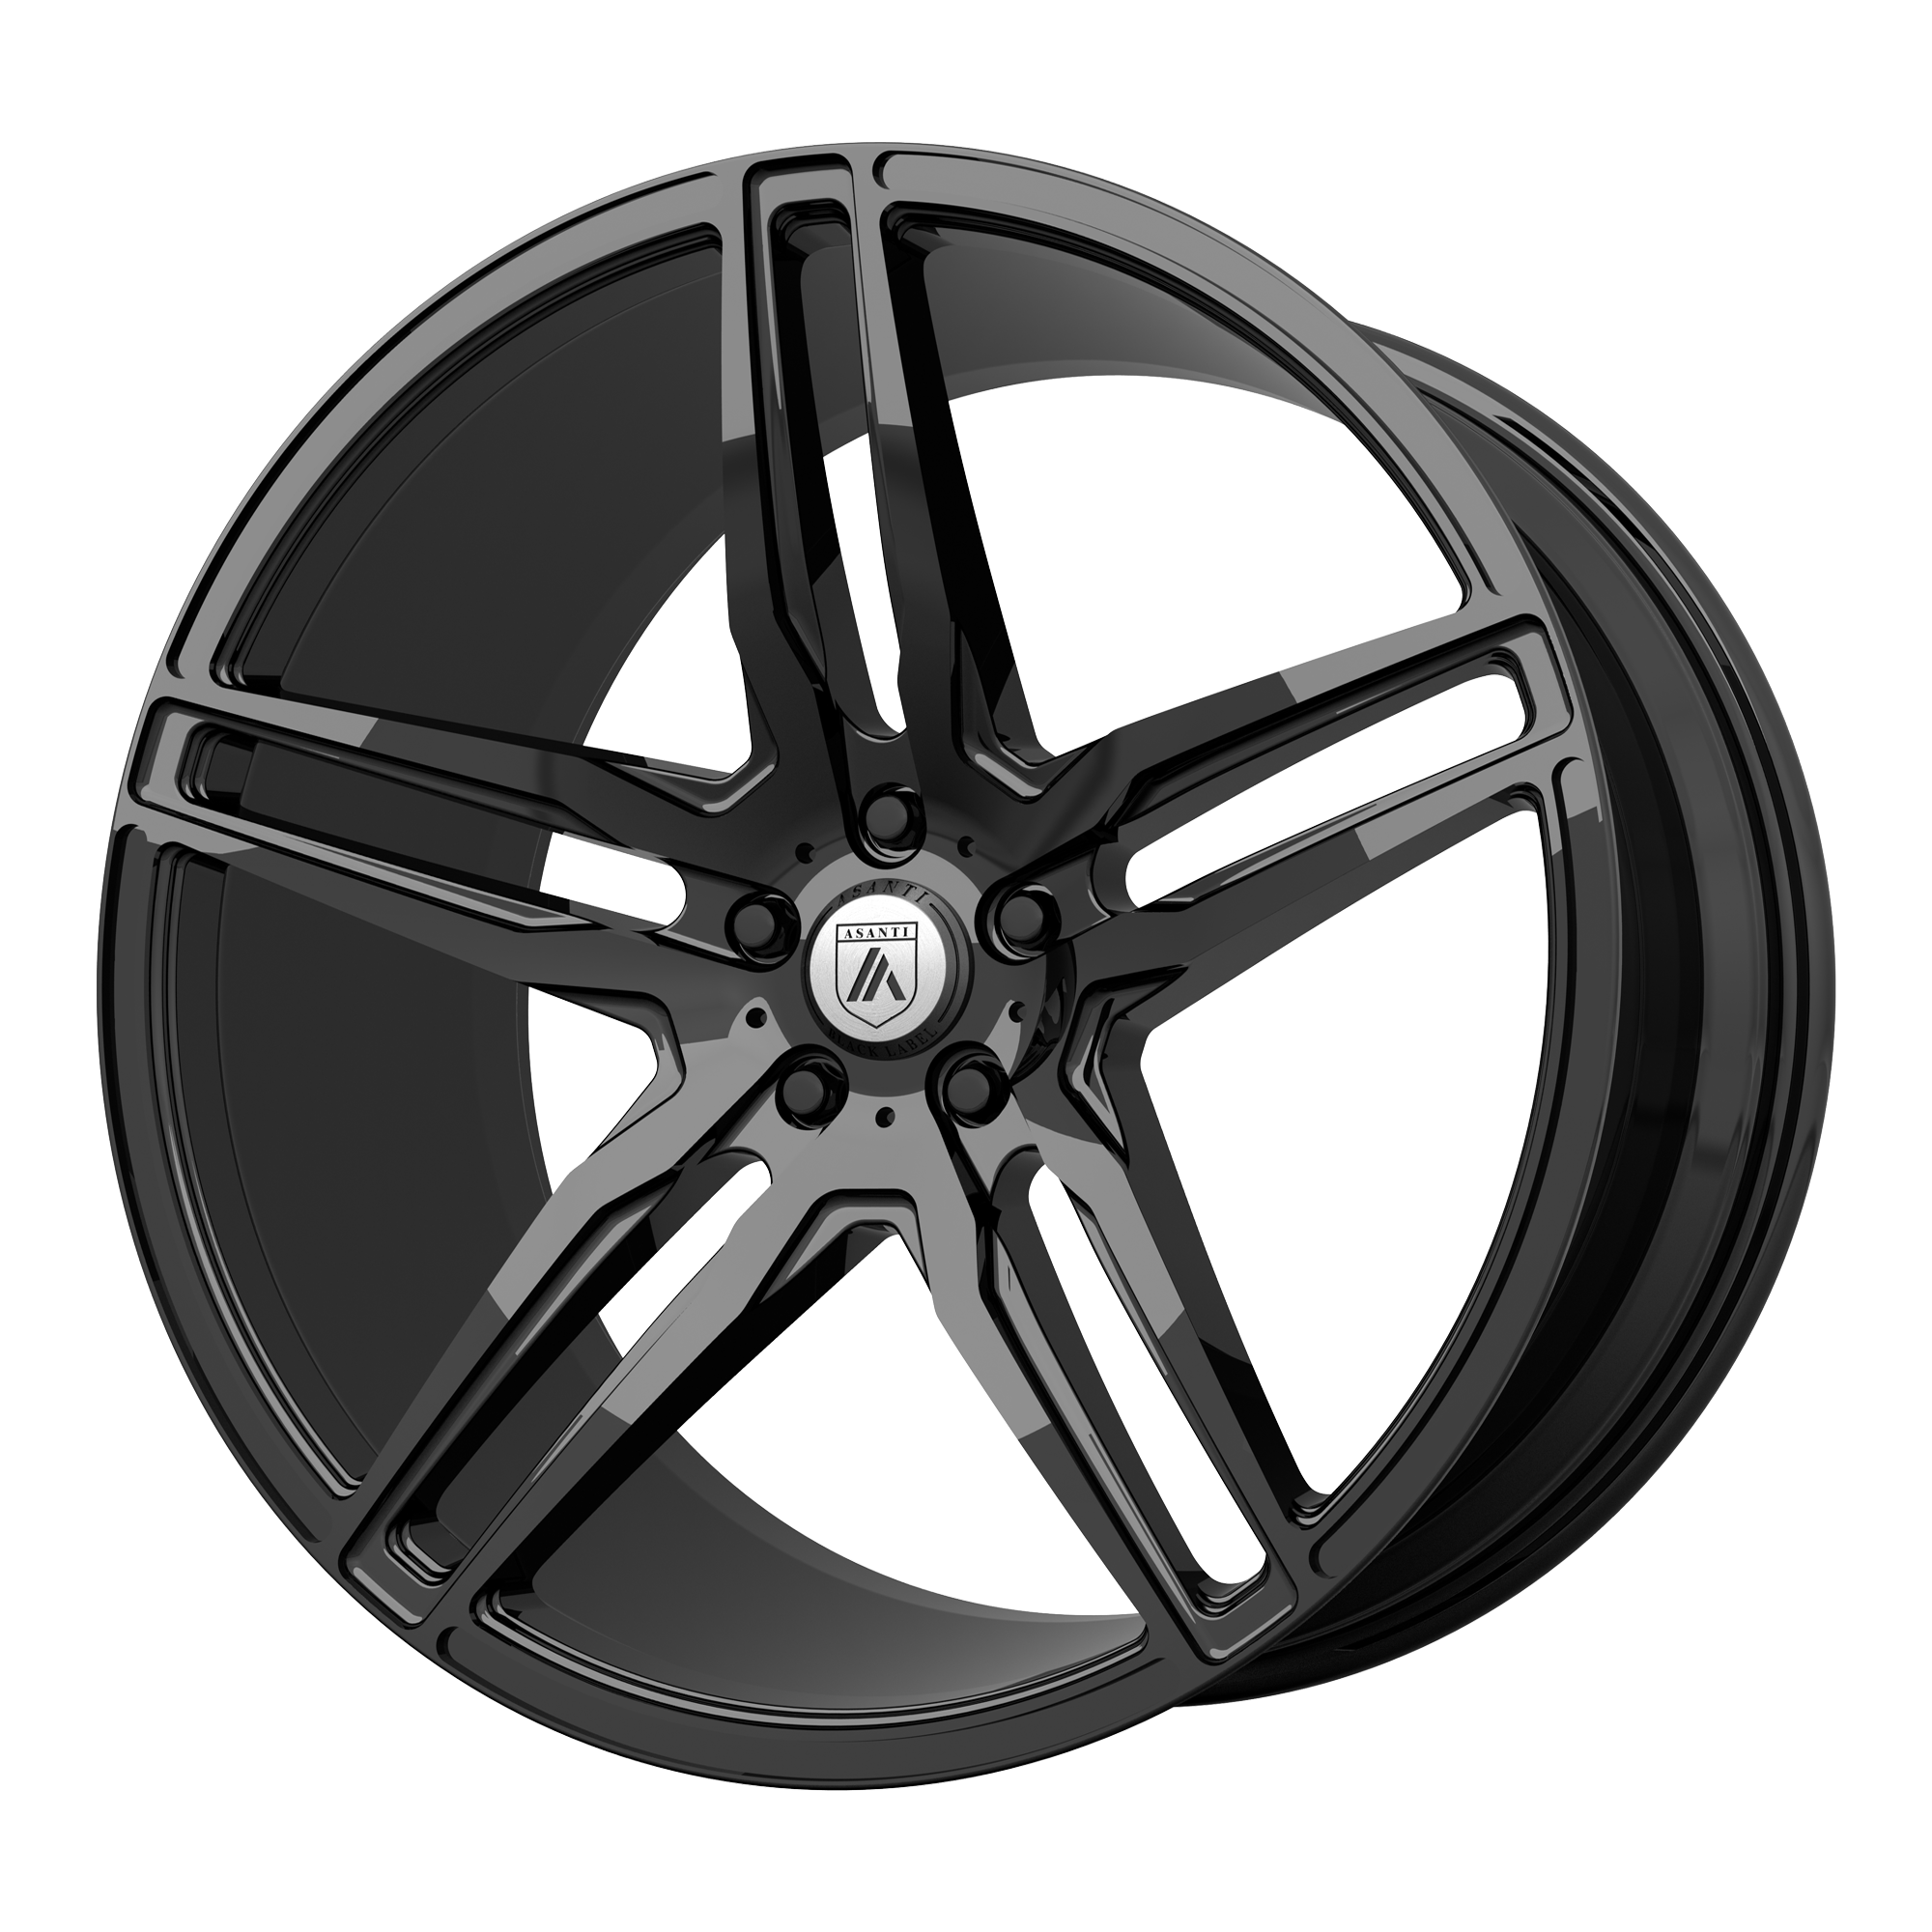 ORION 20x8.5 Blank GLOSS BLACK (38.00 - 45.00 mm) - Tires and Engine Performance